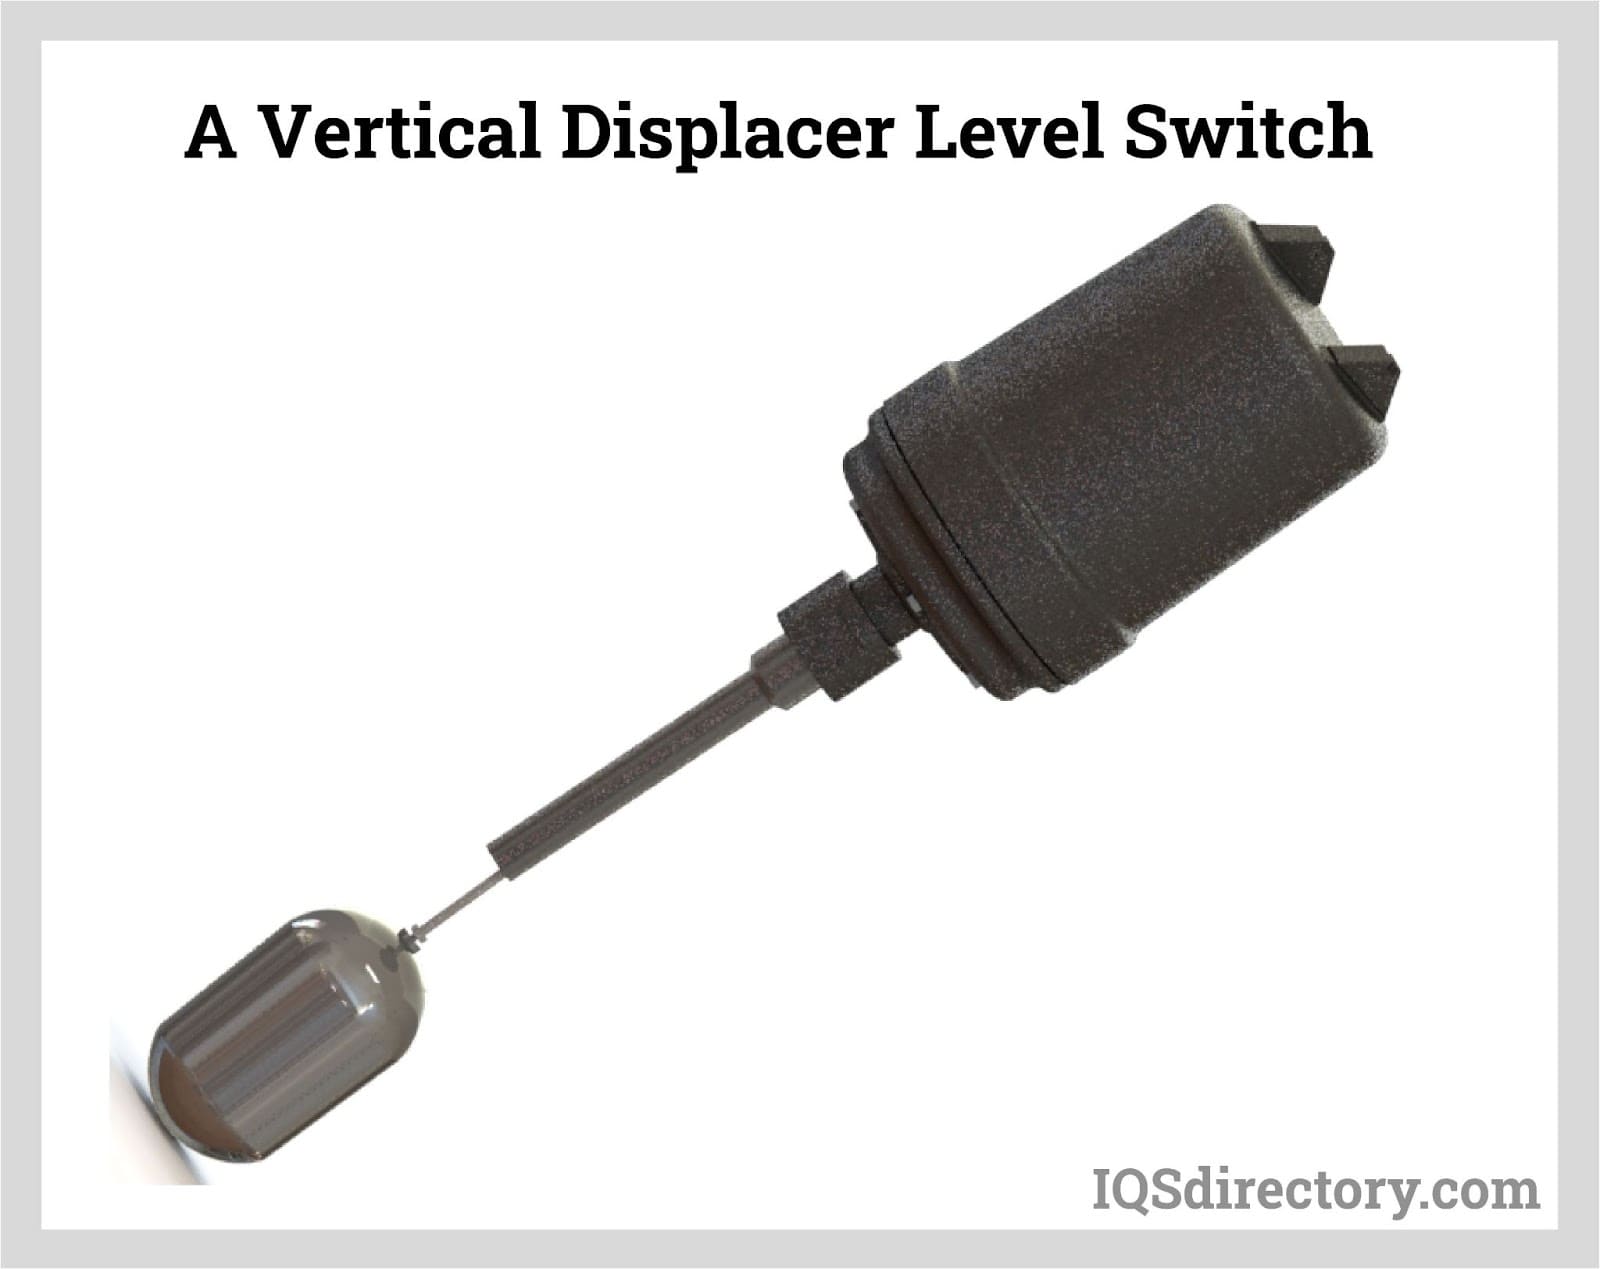 A Vertical Displacer Level Switch